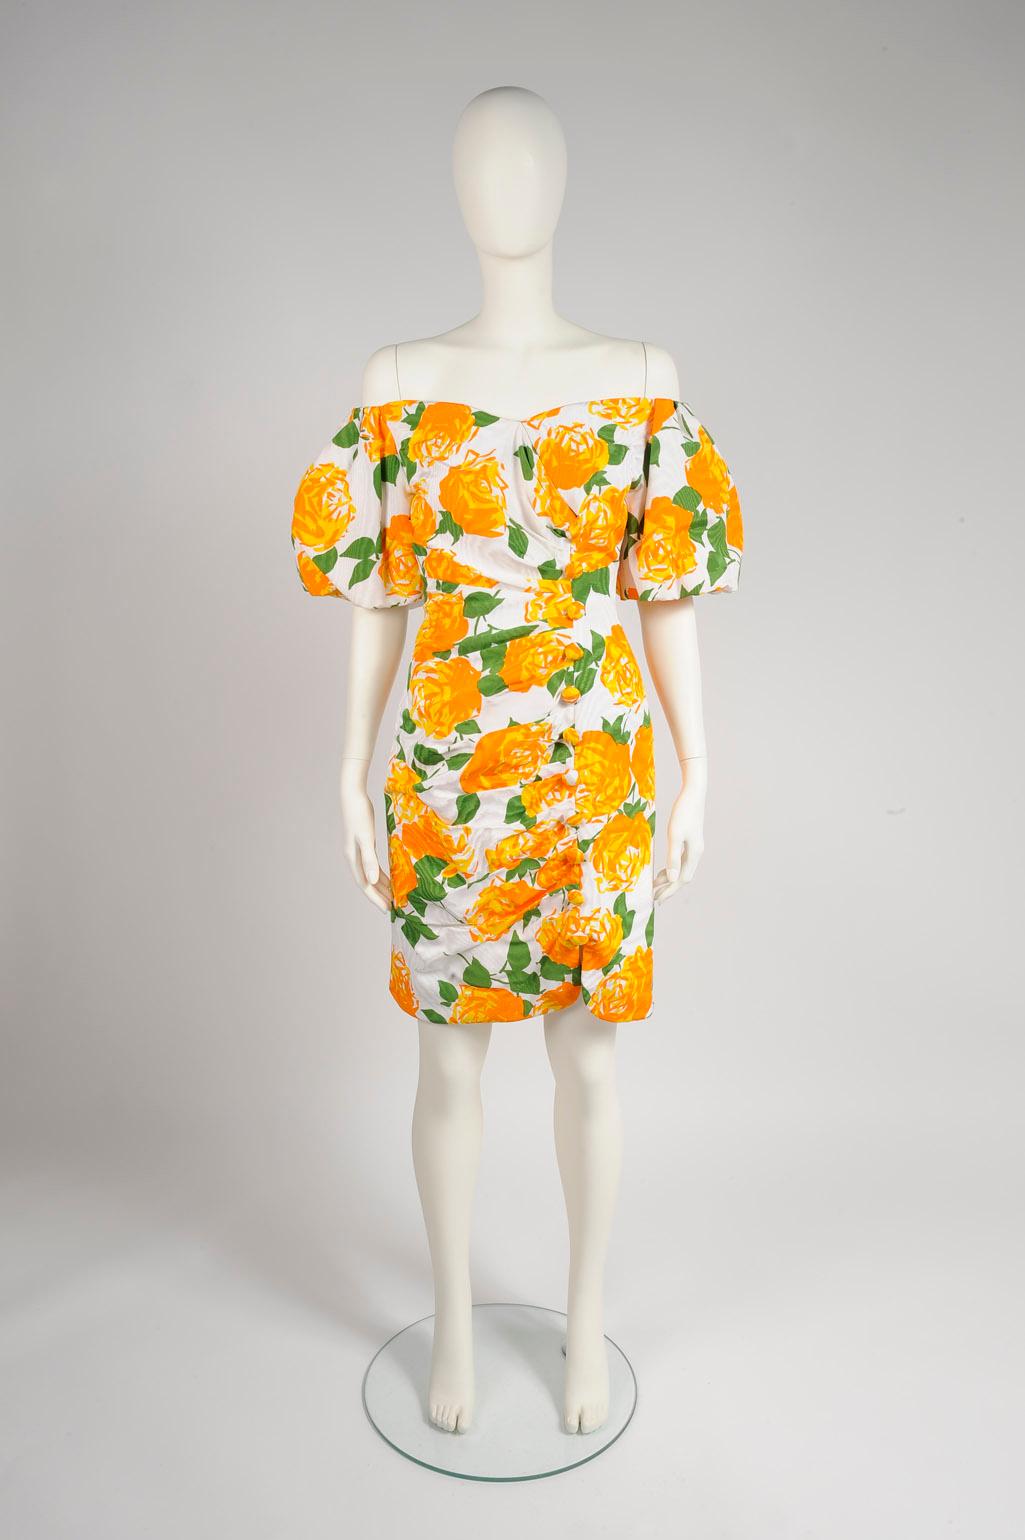 Oversized florals, bold colors and ruched silhouettes have flooded the collections for at least two seasons. So this genuine 80s Arnold Scaasi dress is completely in trend !
Finished with a 